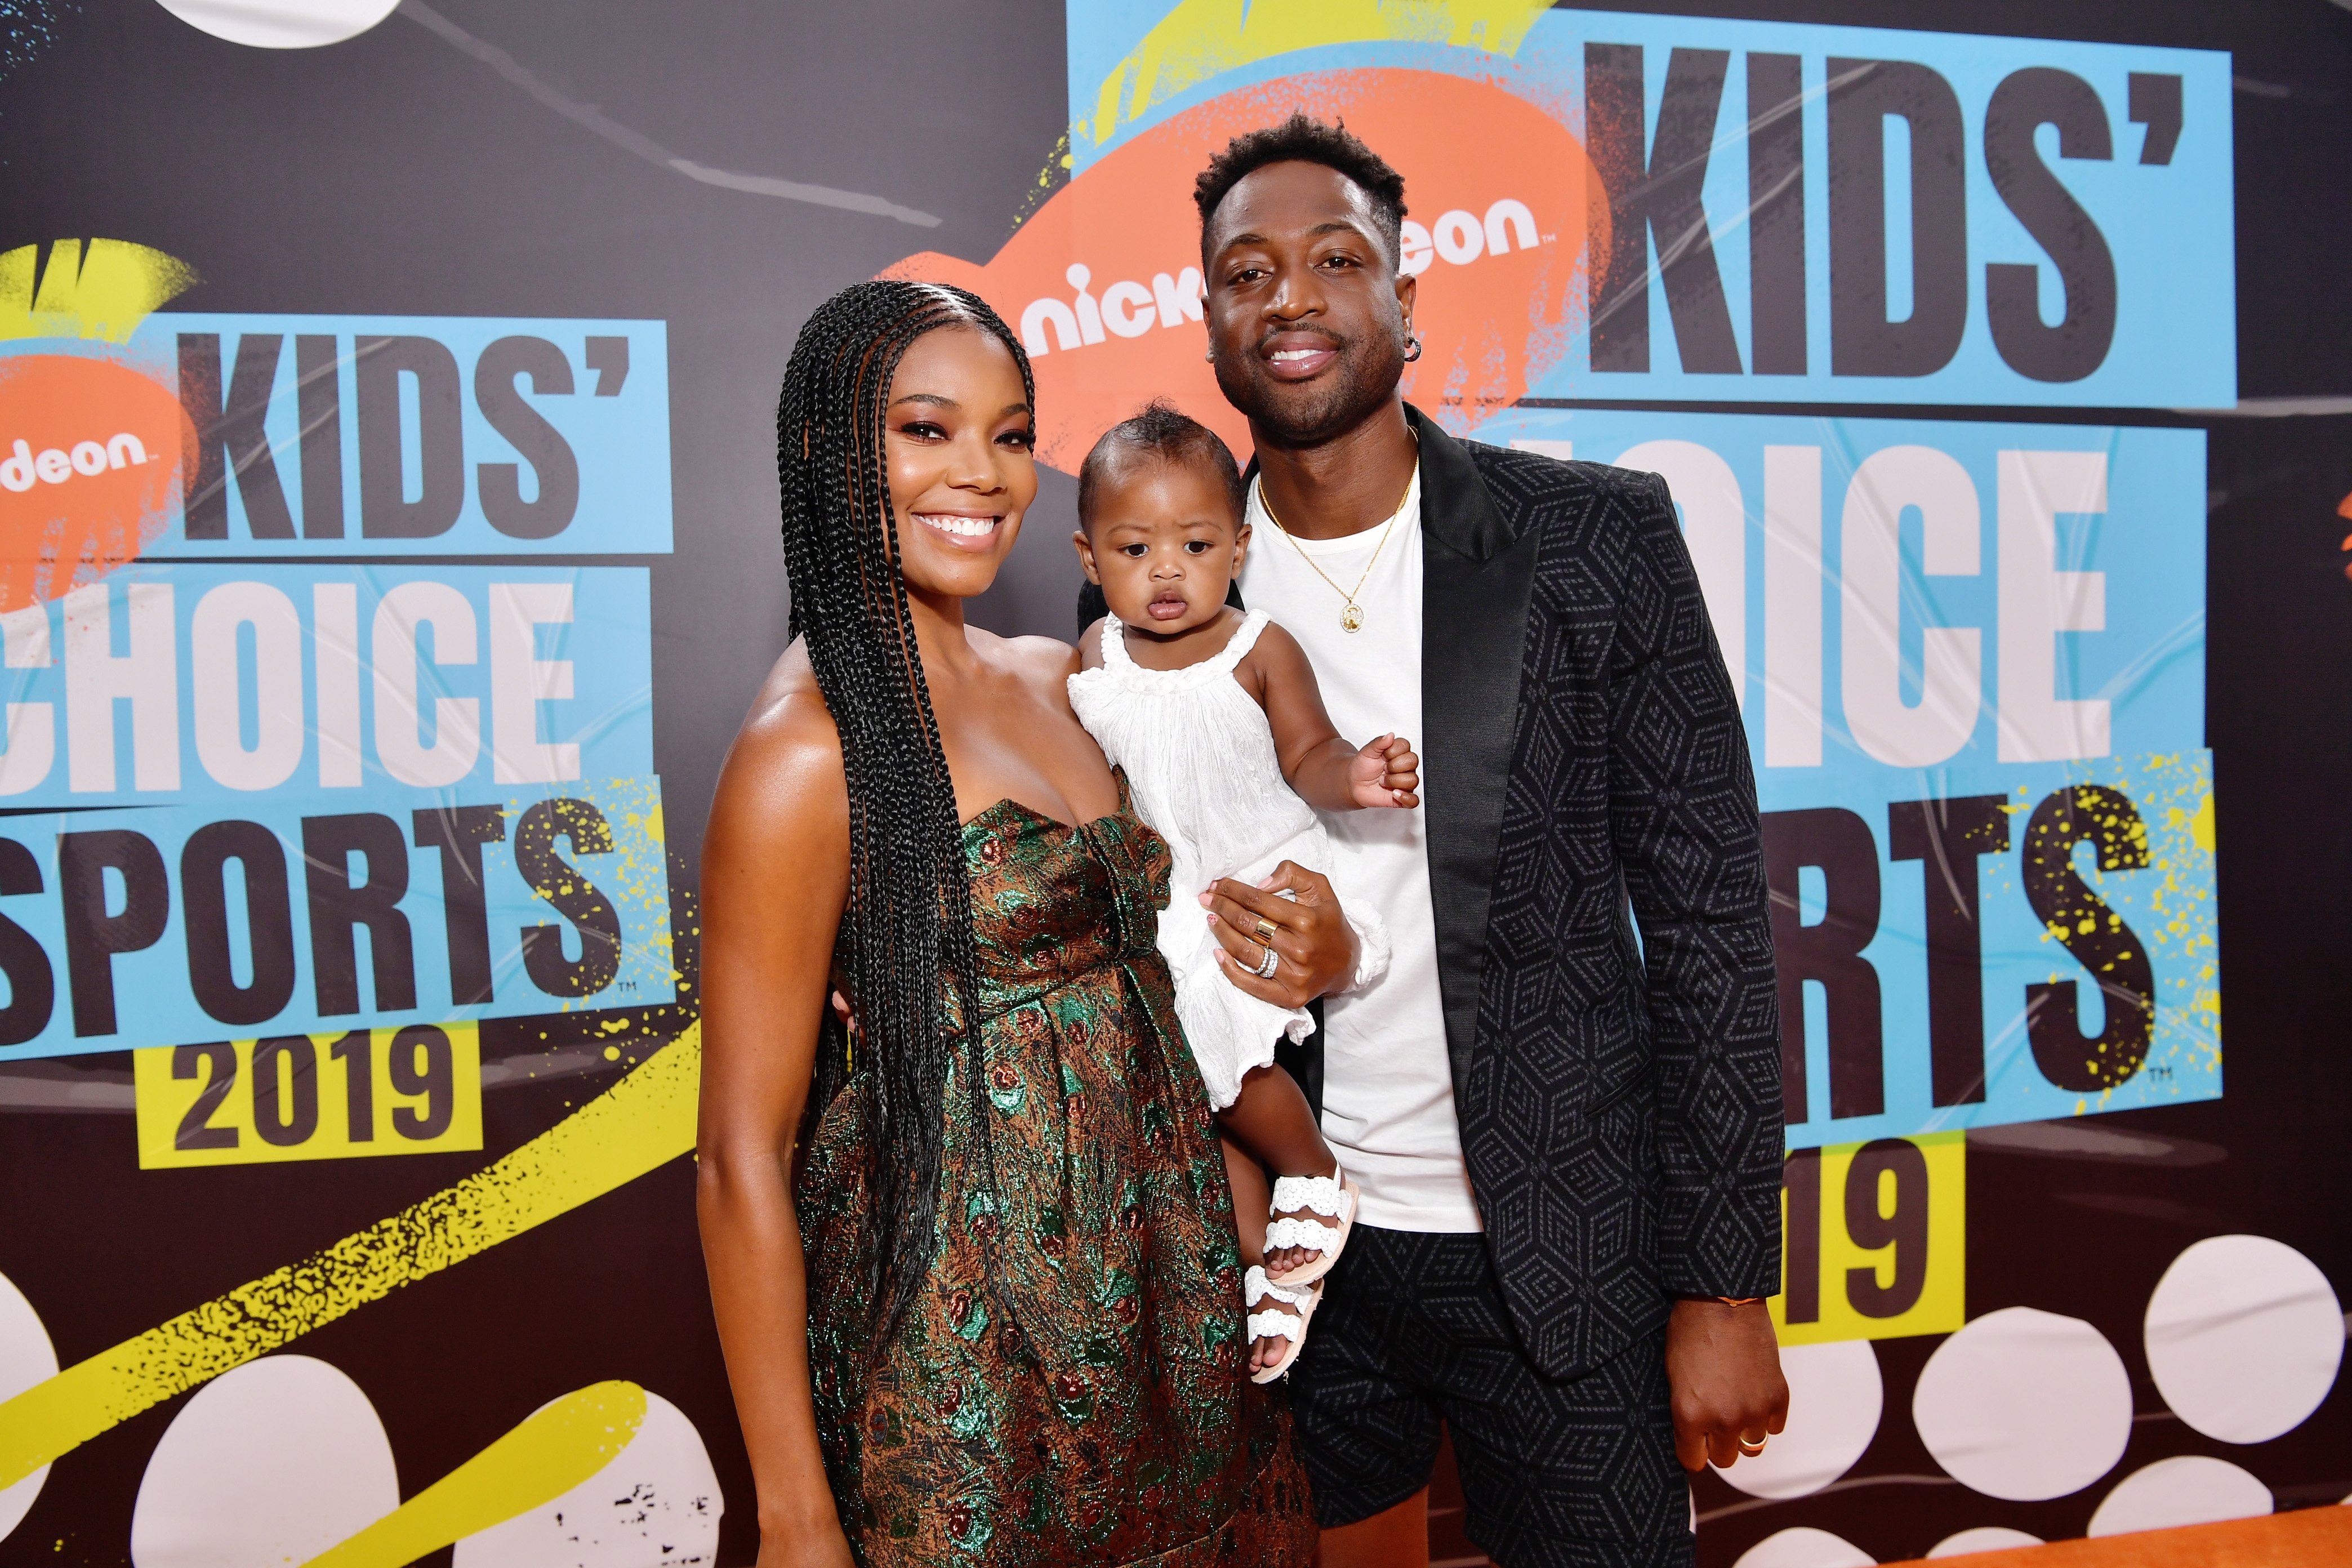 Gabrielle Union, Kaavia James Union Wade, and Dwyane Wade attend Nickelodeon Kids' Choice Sports 2019 at Barker Hangar on July 11, 2019, in Santa Monica, California. | Source: Getty Images